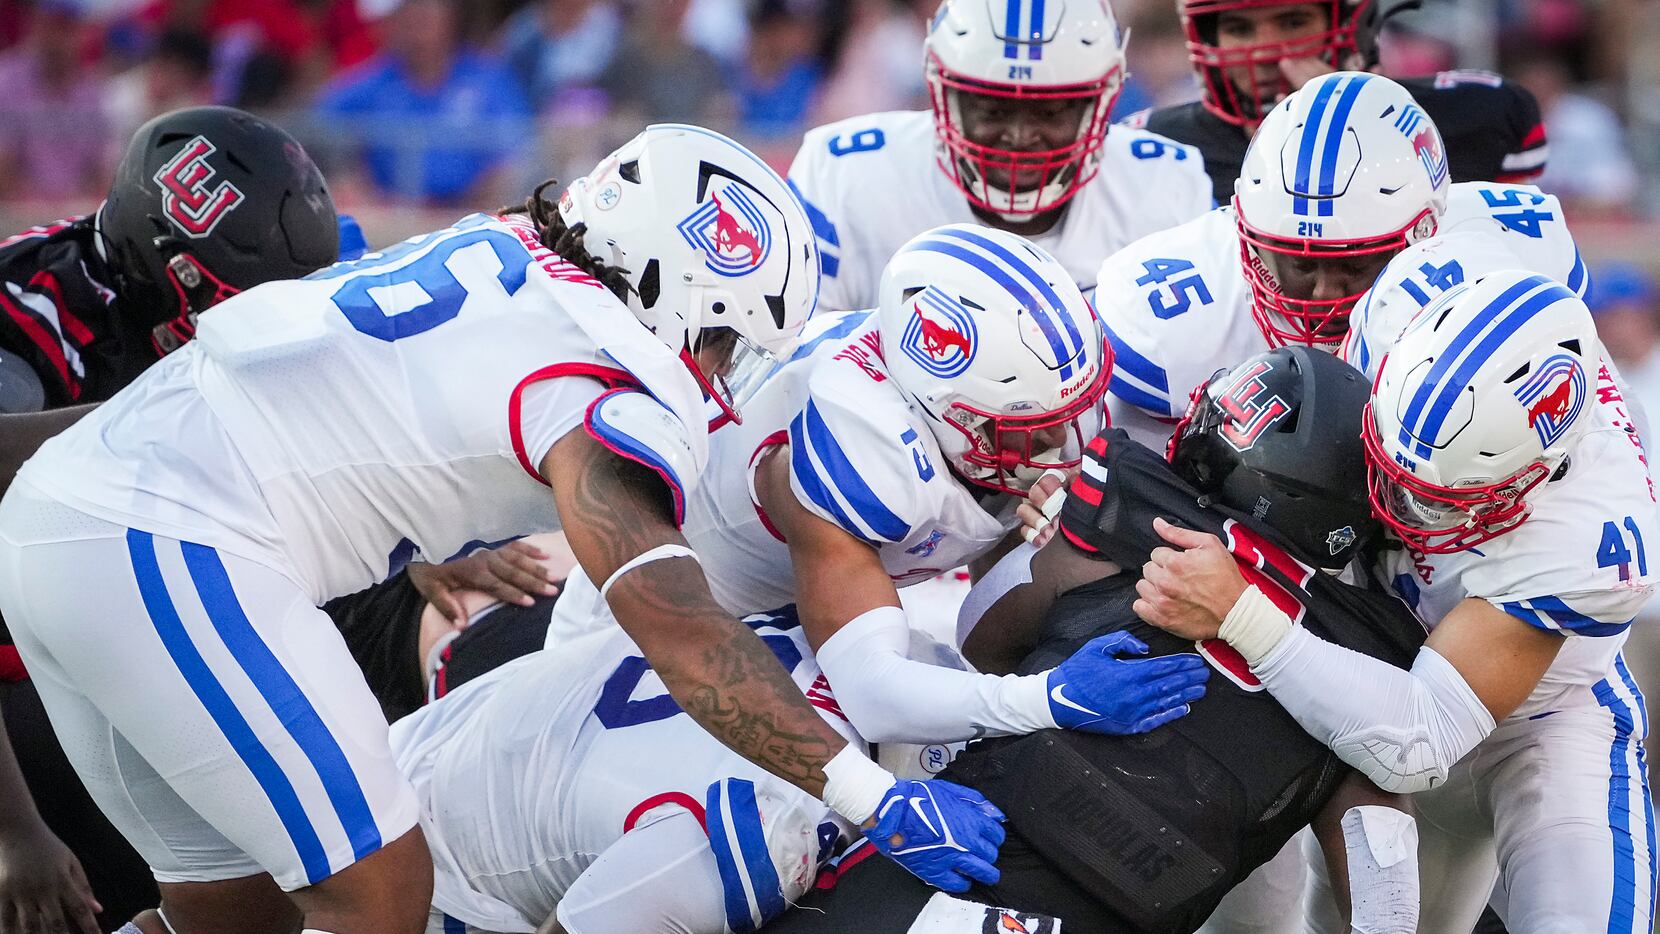 Lamar Cardinals running back Khalan Griffin (6) is smothered by SMU defensive tackle DeVere...